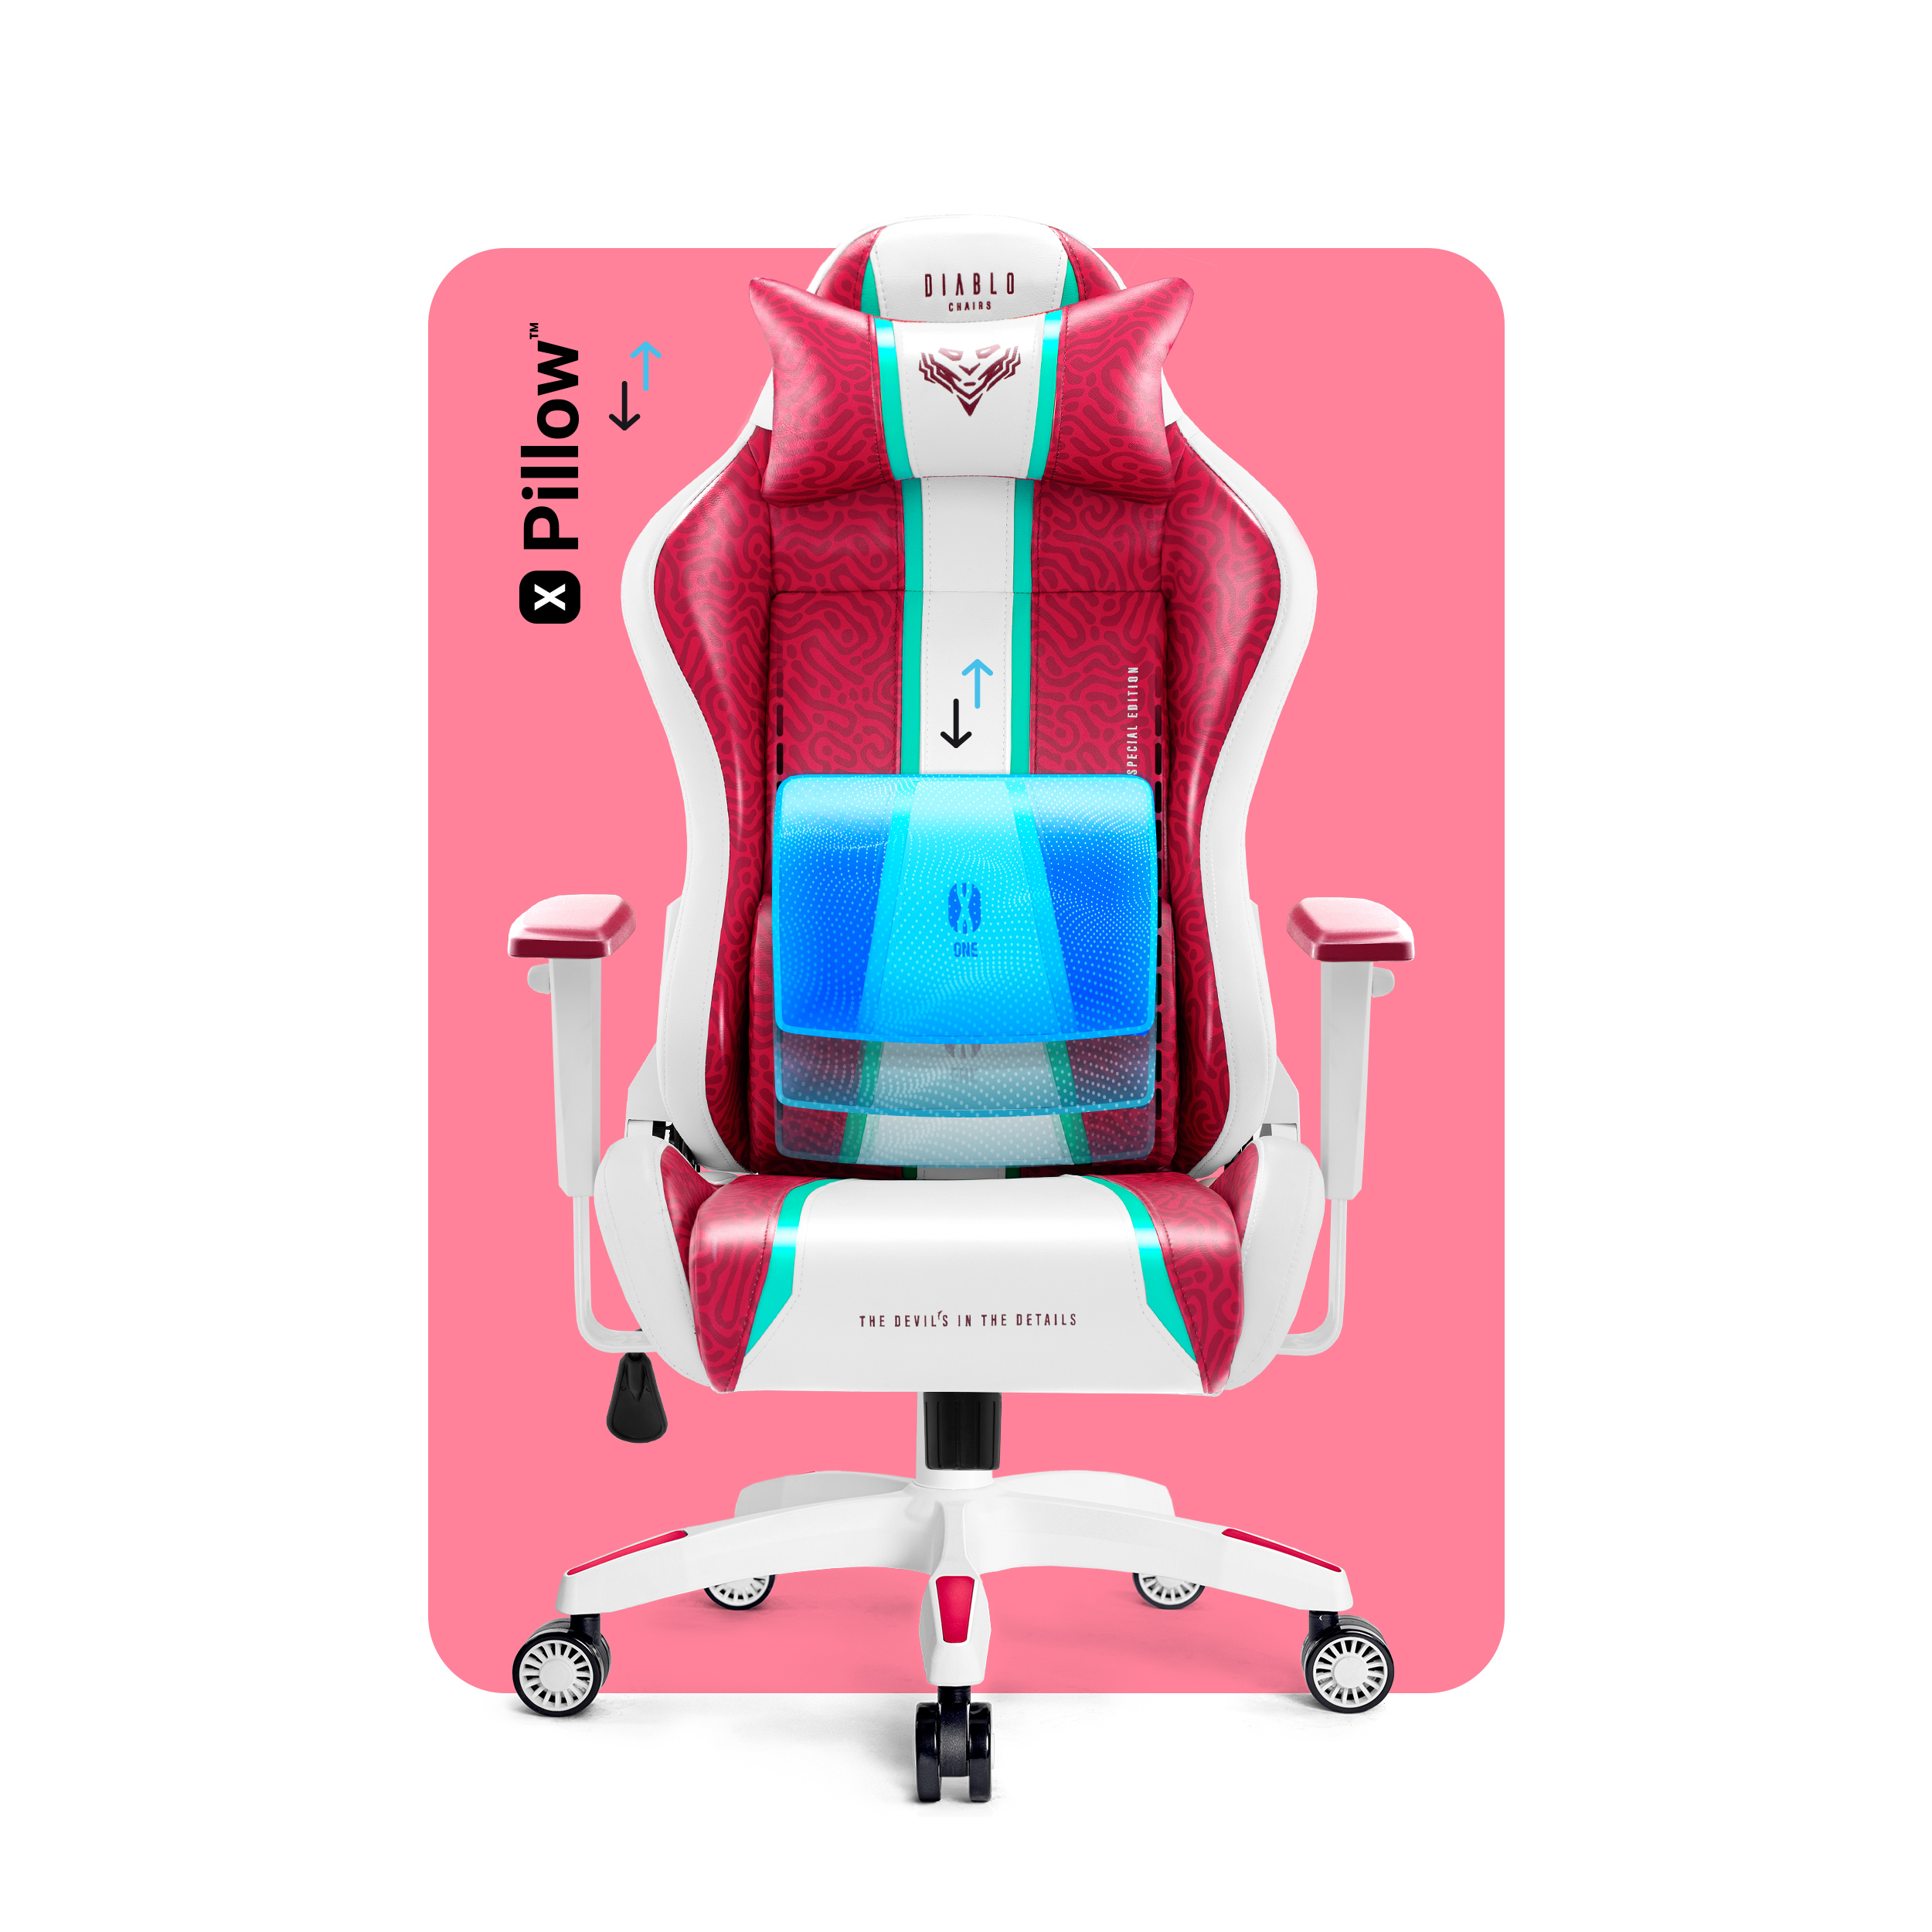 DIABLO CHAIRS X-ONE 2.0 NORMAL Rosa CANDY Gaming Stuhl